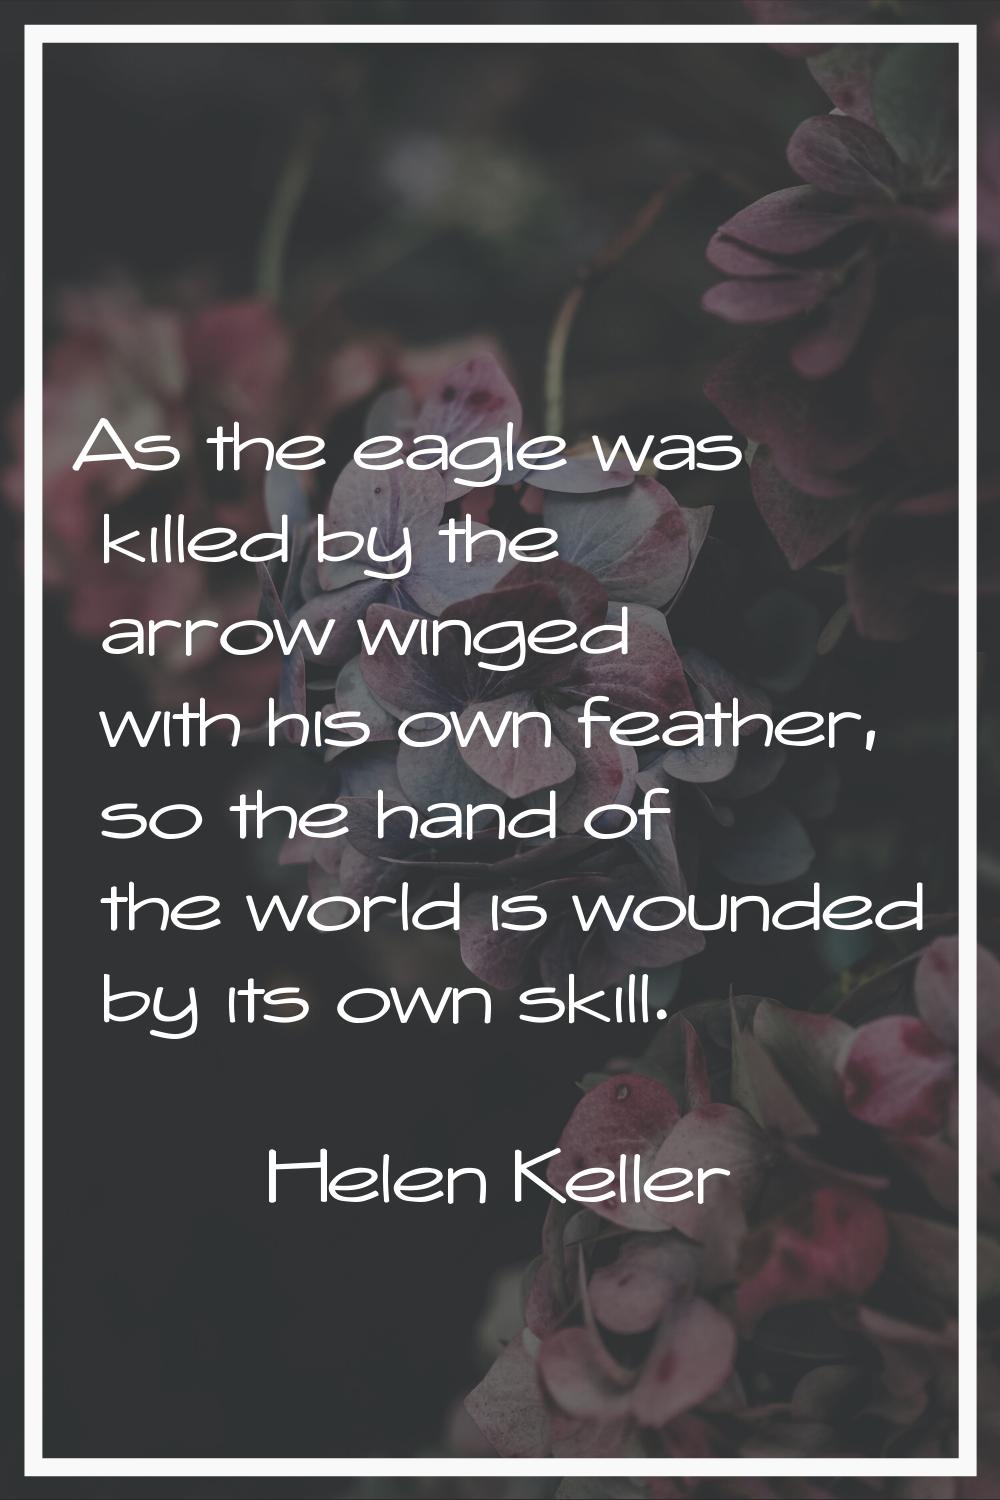 As the eagle was killed by the arrow winged with his own feather, so the hand of the world is wound